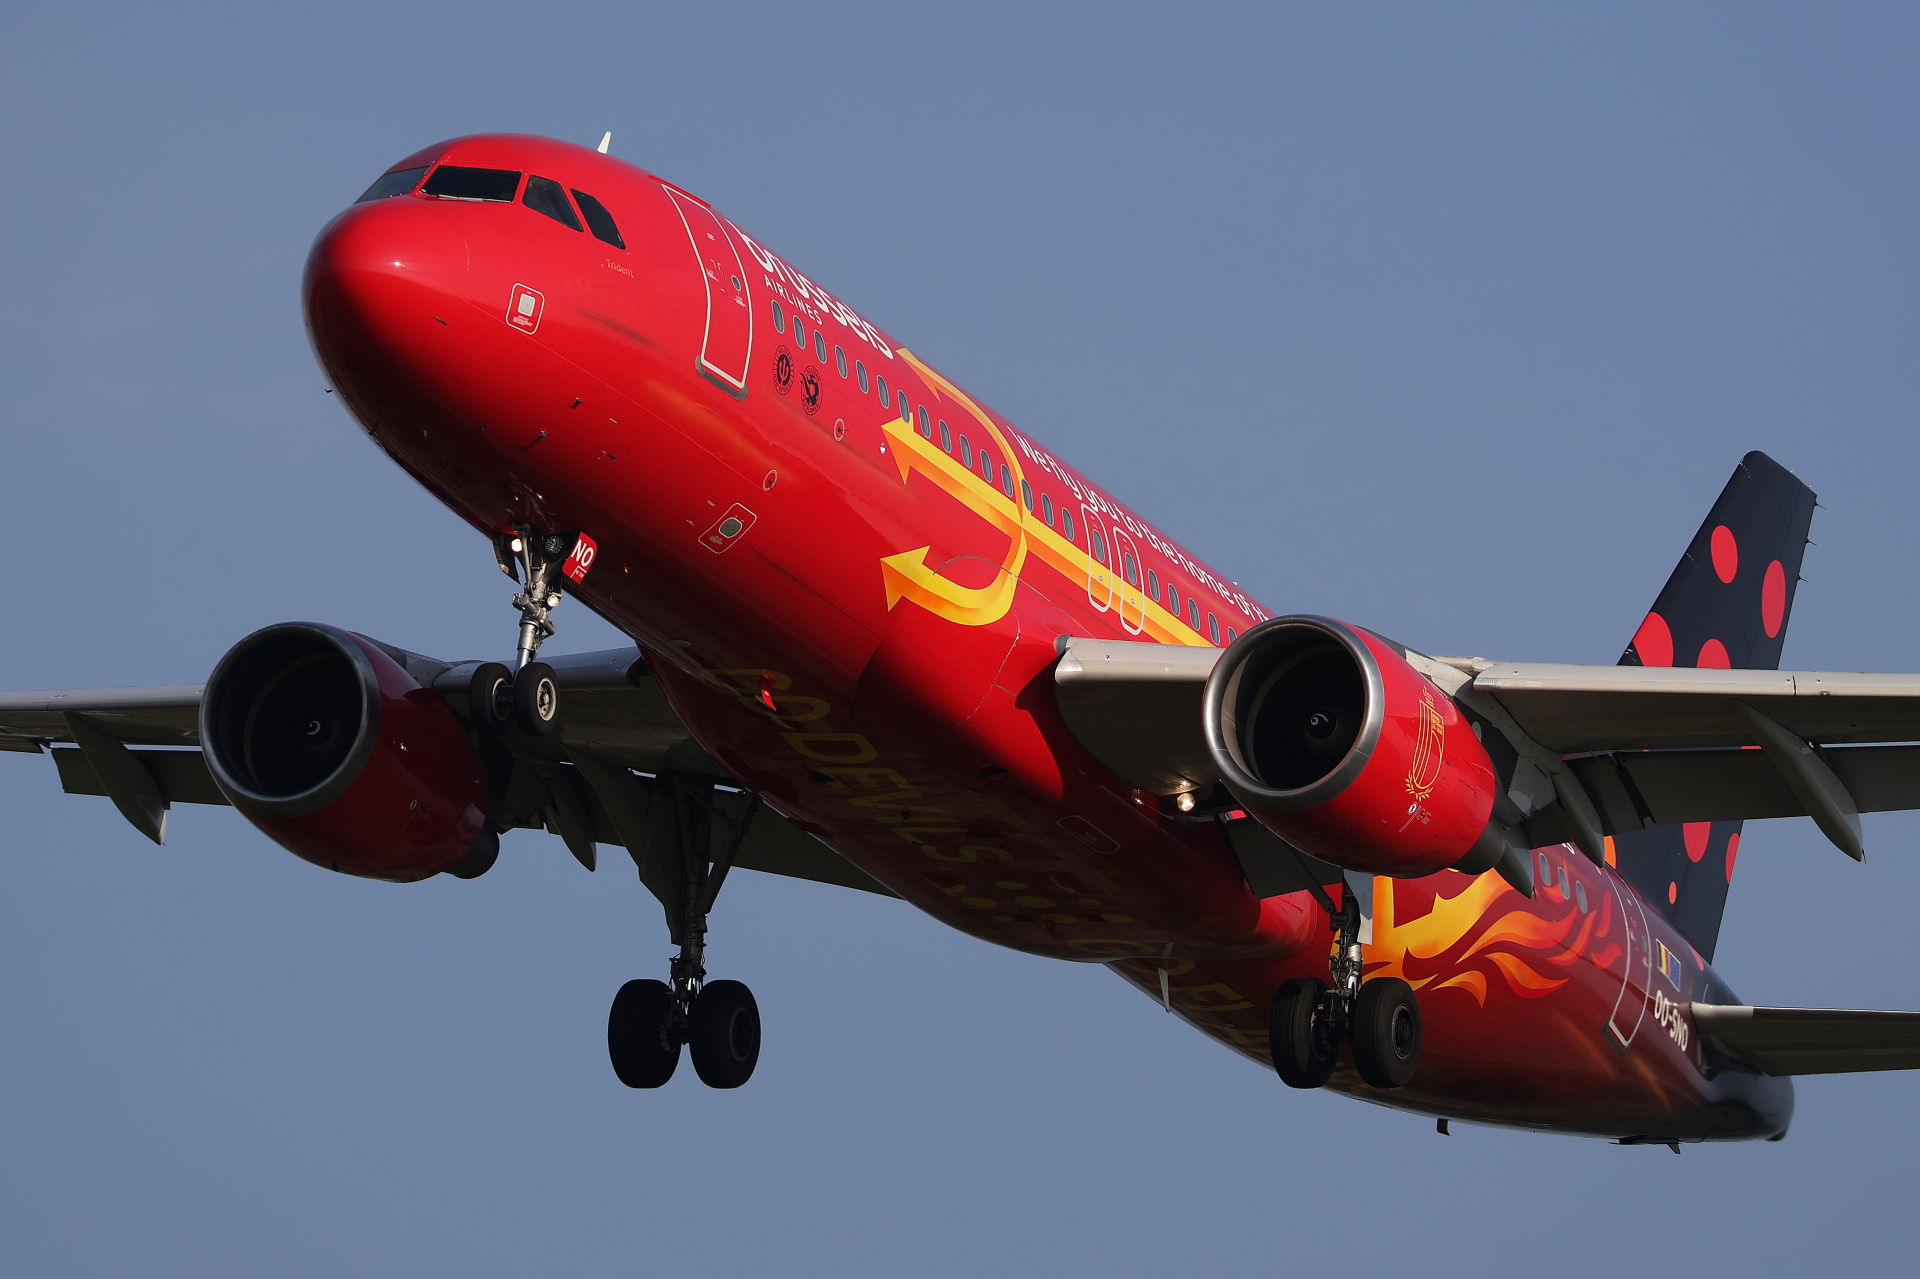 OO-SNO (Belgian Icons - Trident: Red Devils and Red Flames livery) (Aircraft » EPWA Spotting » Airbus A320-200 » Brussels Airlines)